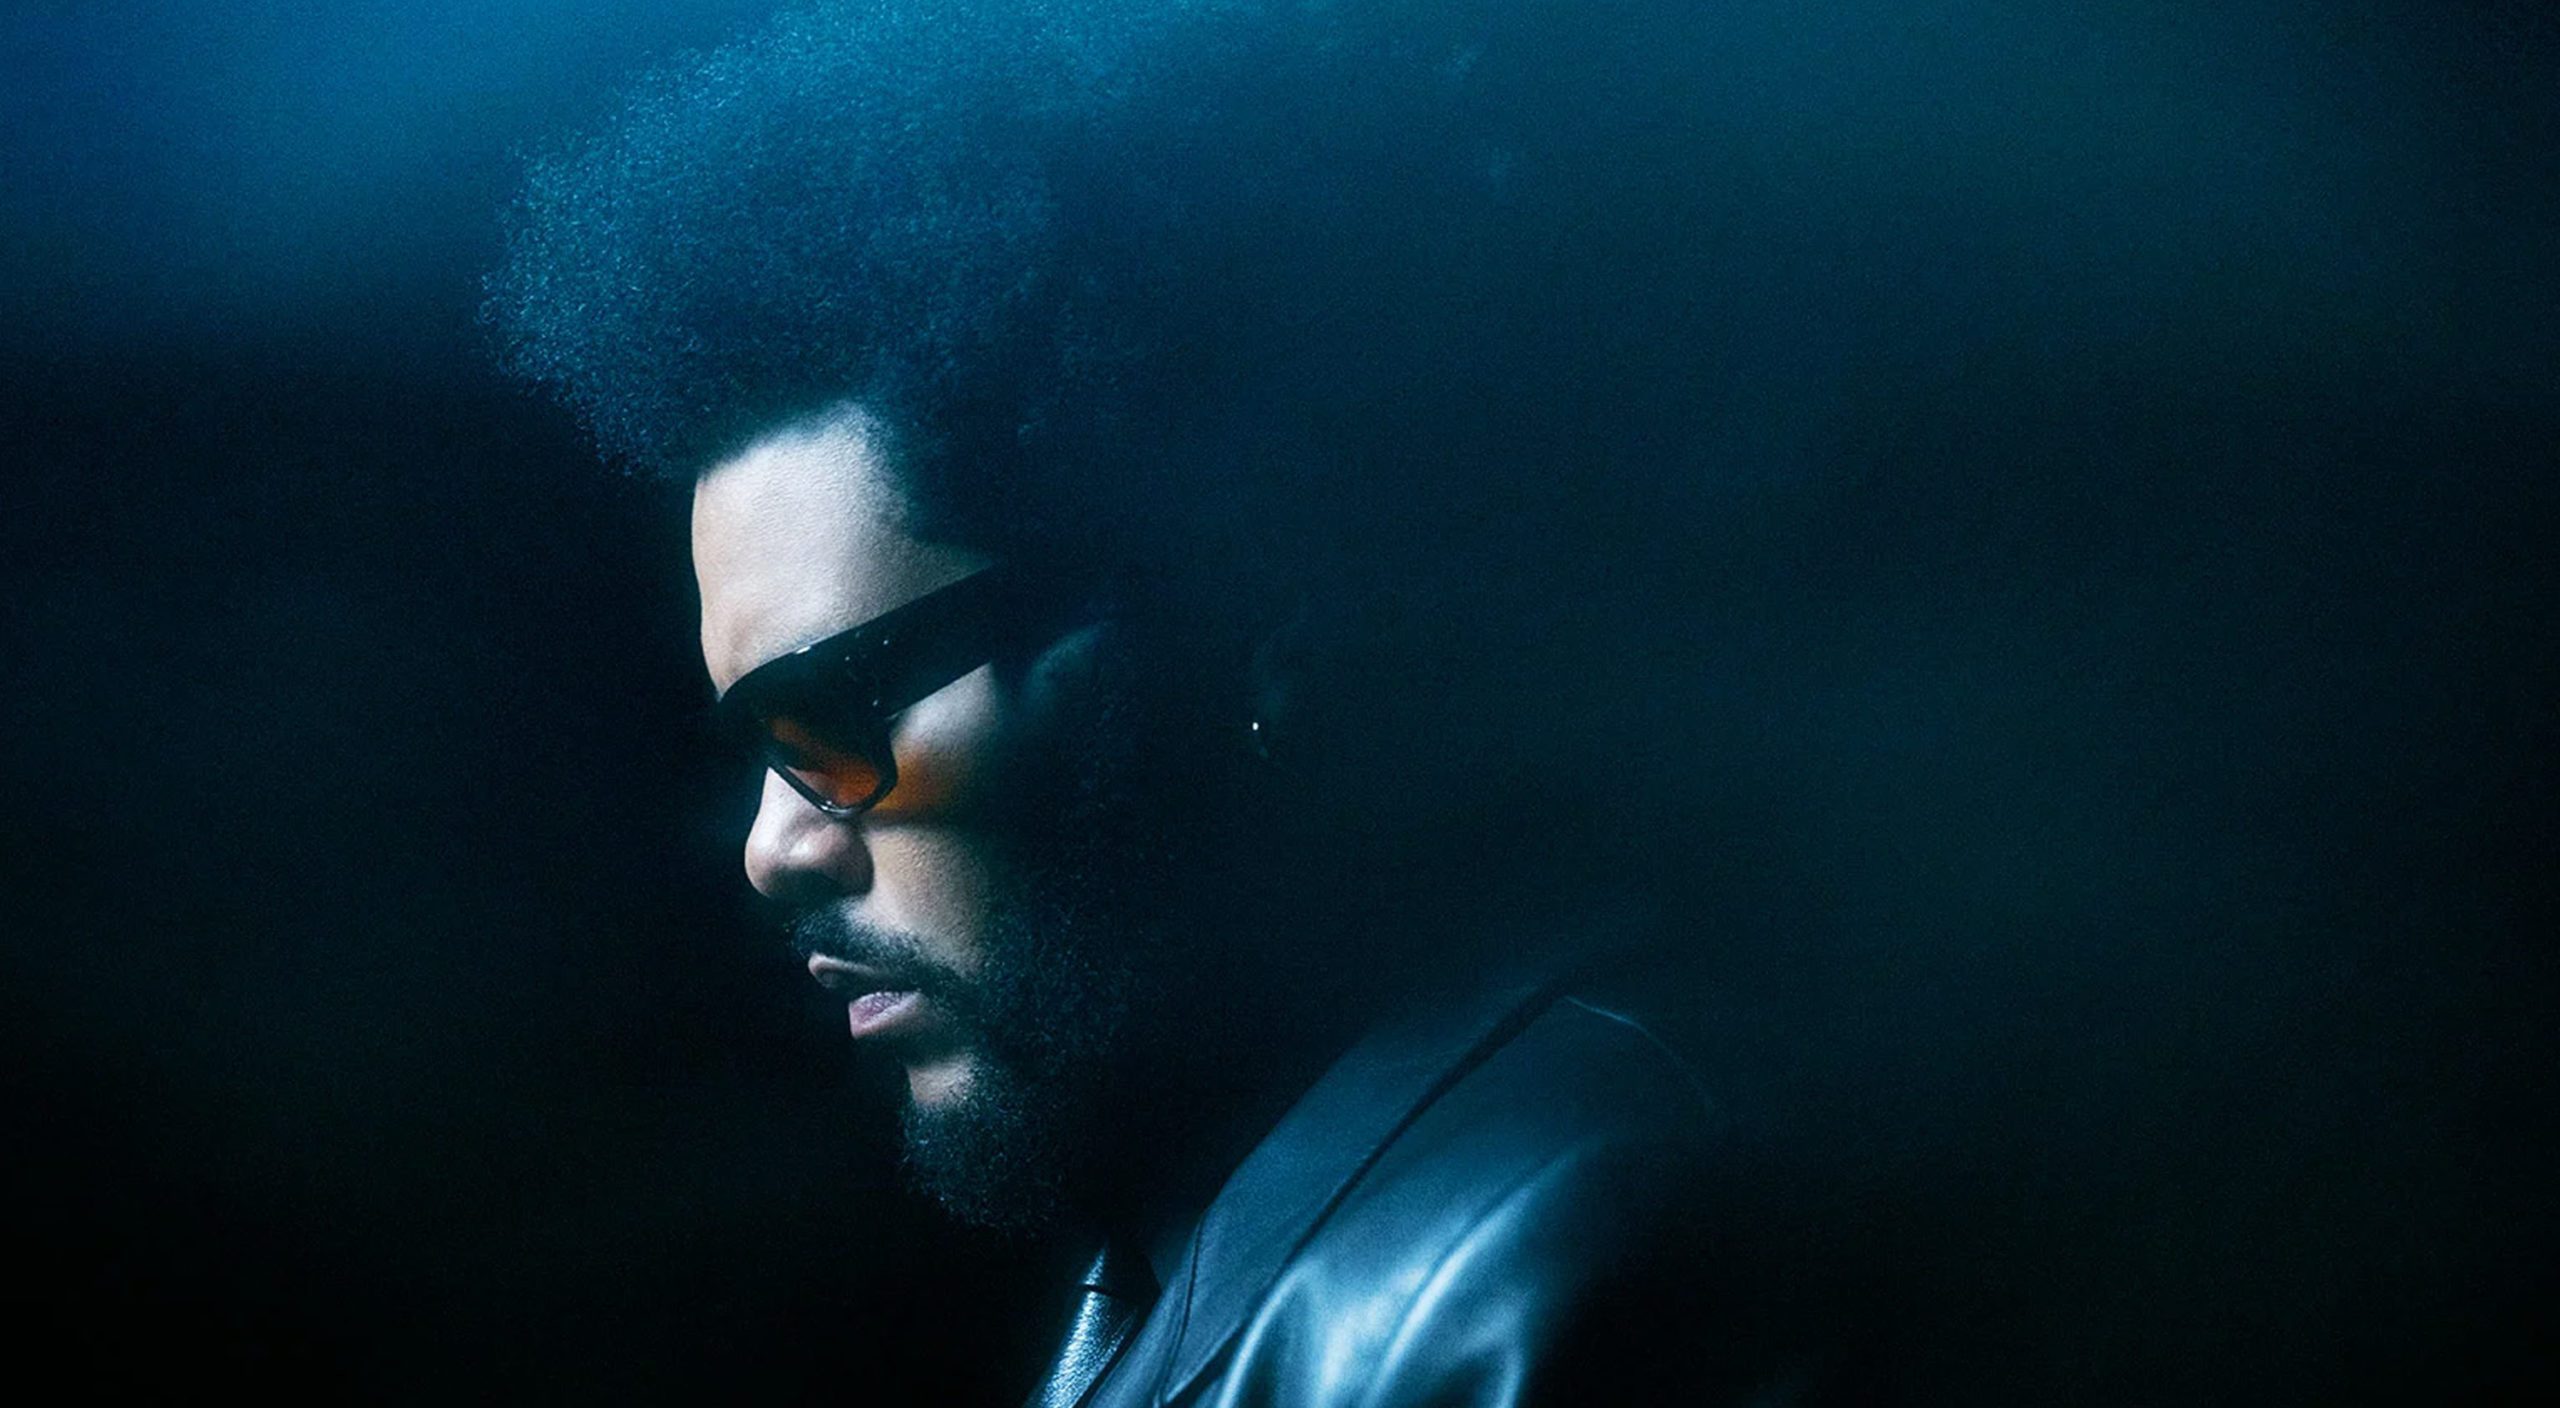 The Weeknd and His Mustache Announce New Album